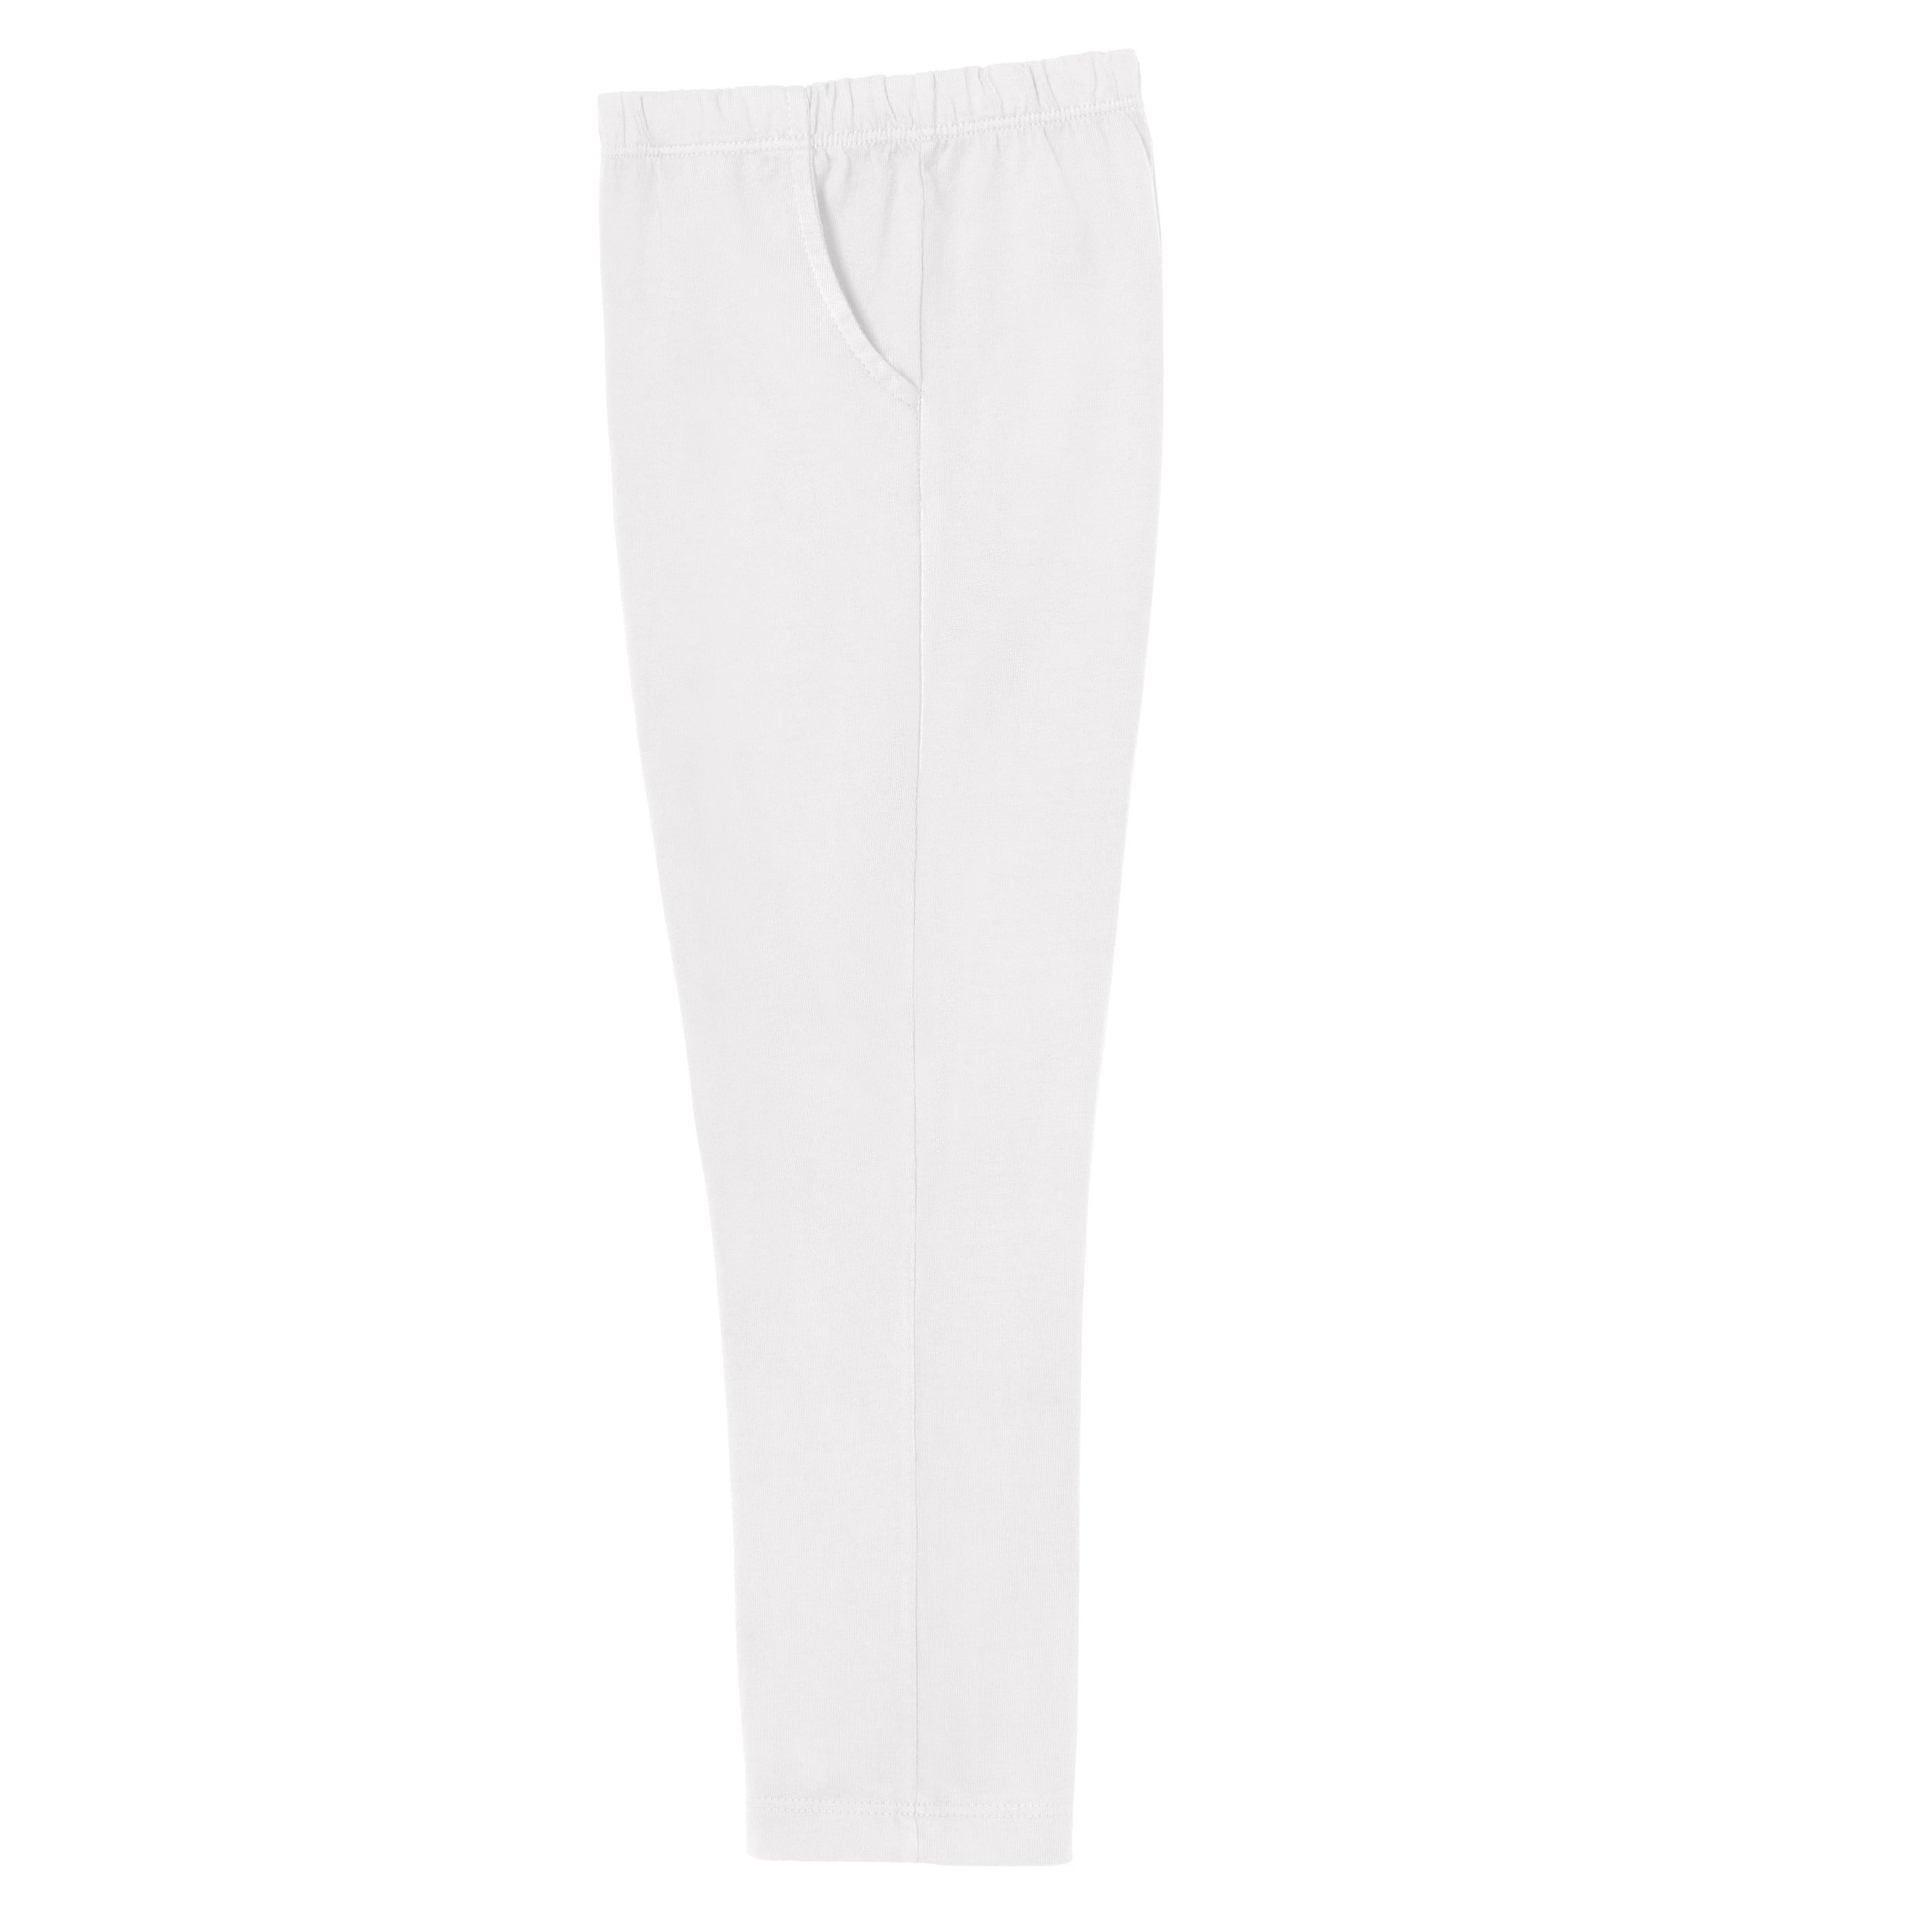 Soft Surroundings Pippa Pull On Pants Solid White Style# 32944 Petite Small